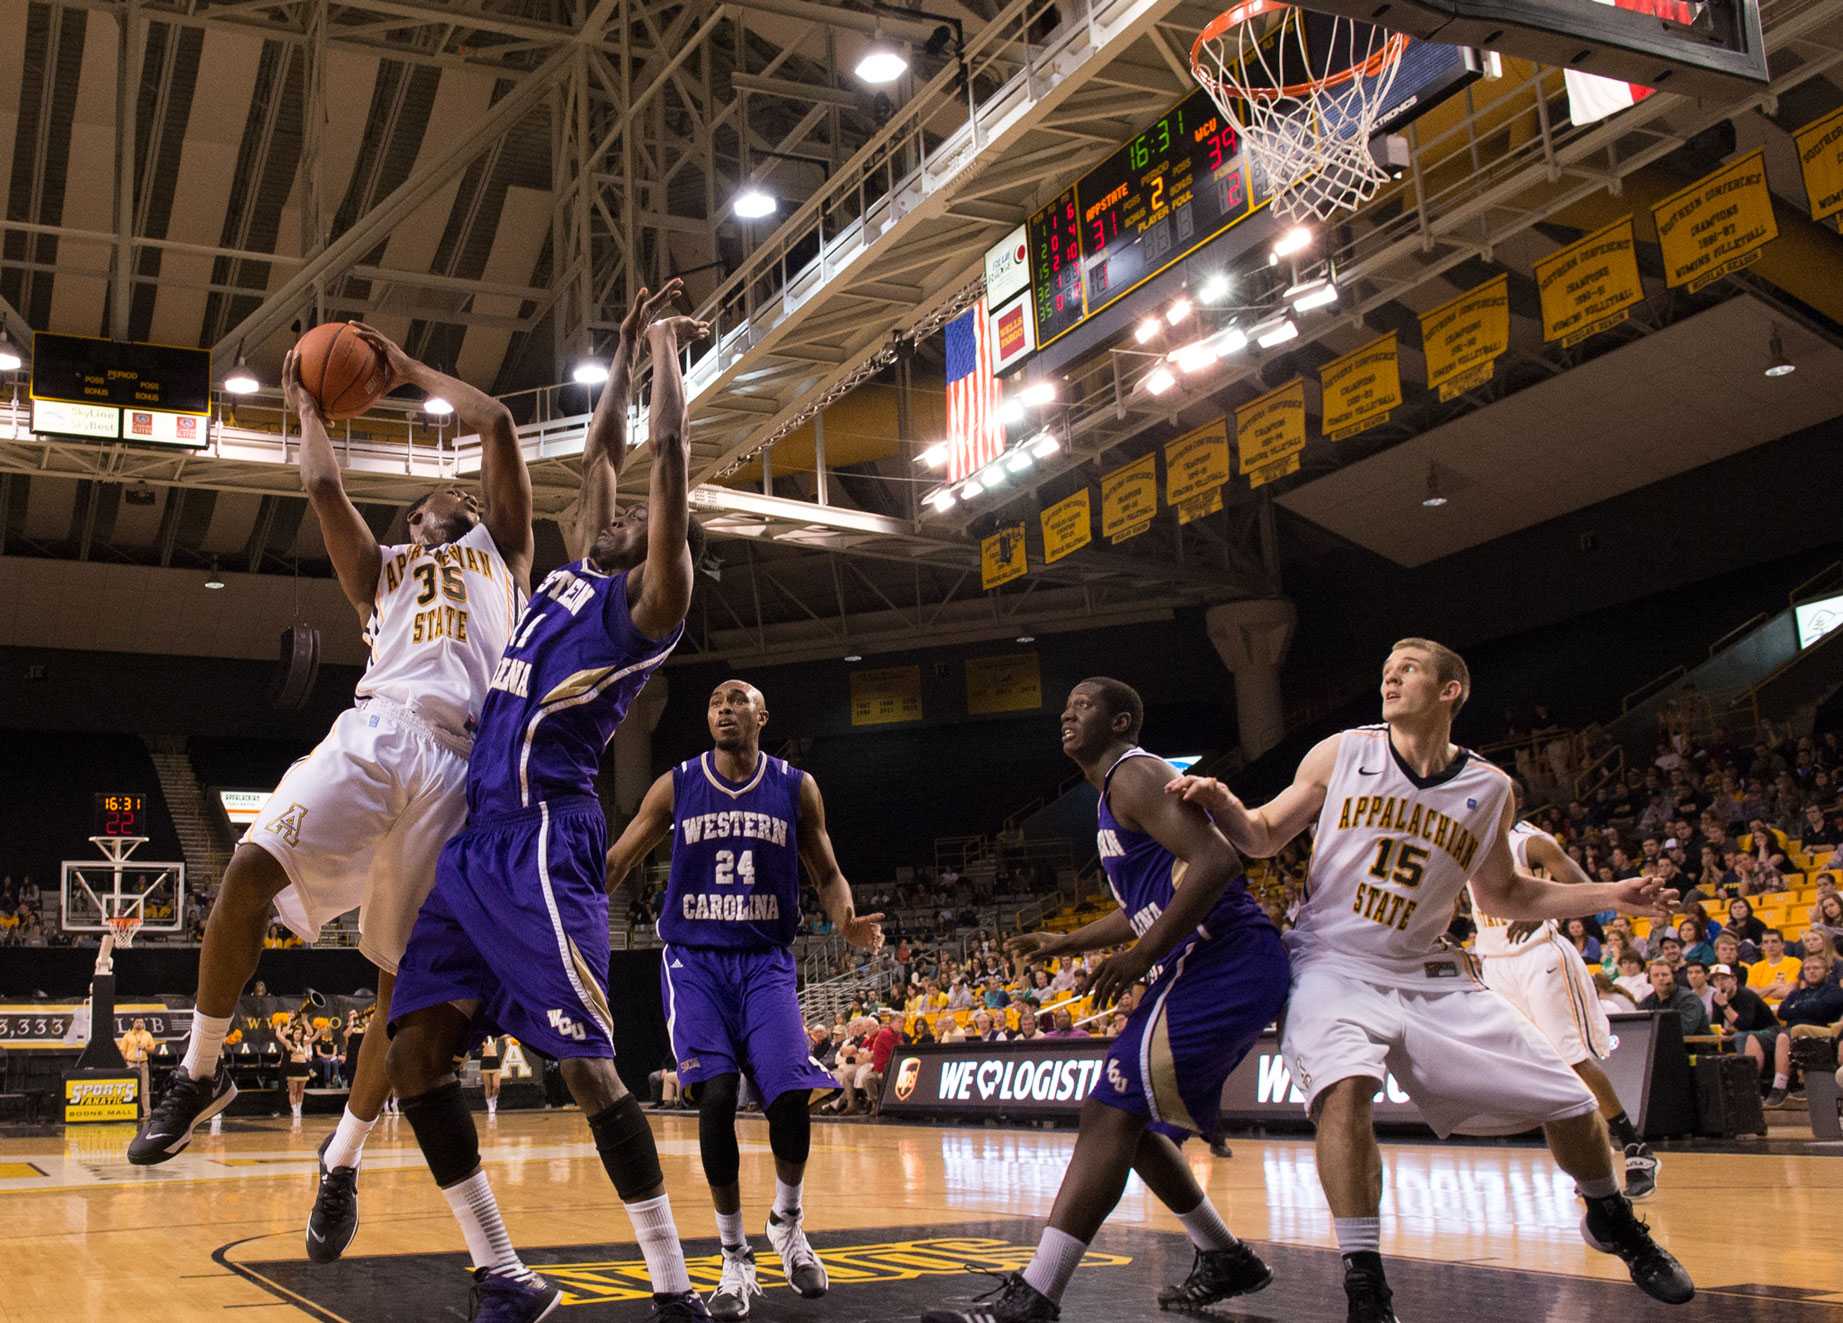 Junior forward Jay Canty's layup attempt is blocked during the second half of Thursday's game against Western Carolina. The Mountaineers fell to the Catamounts 61-74. Photo by Justin Perry  |  The Appalachian